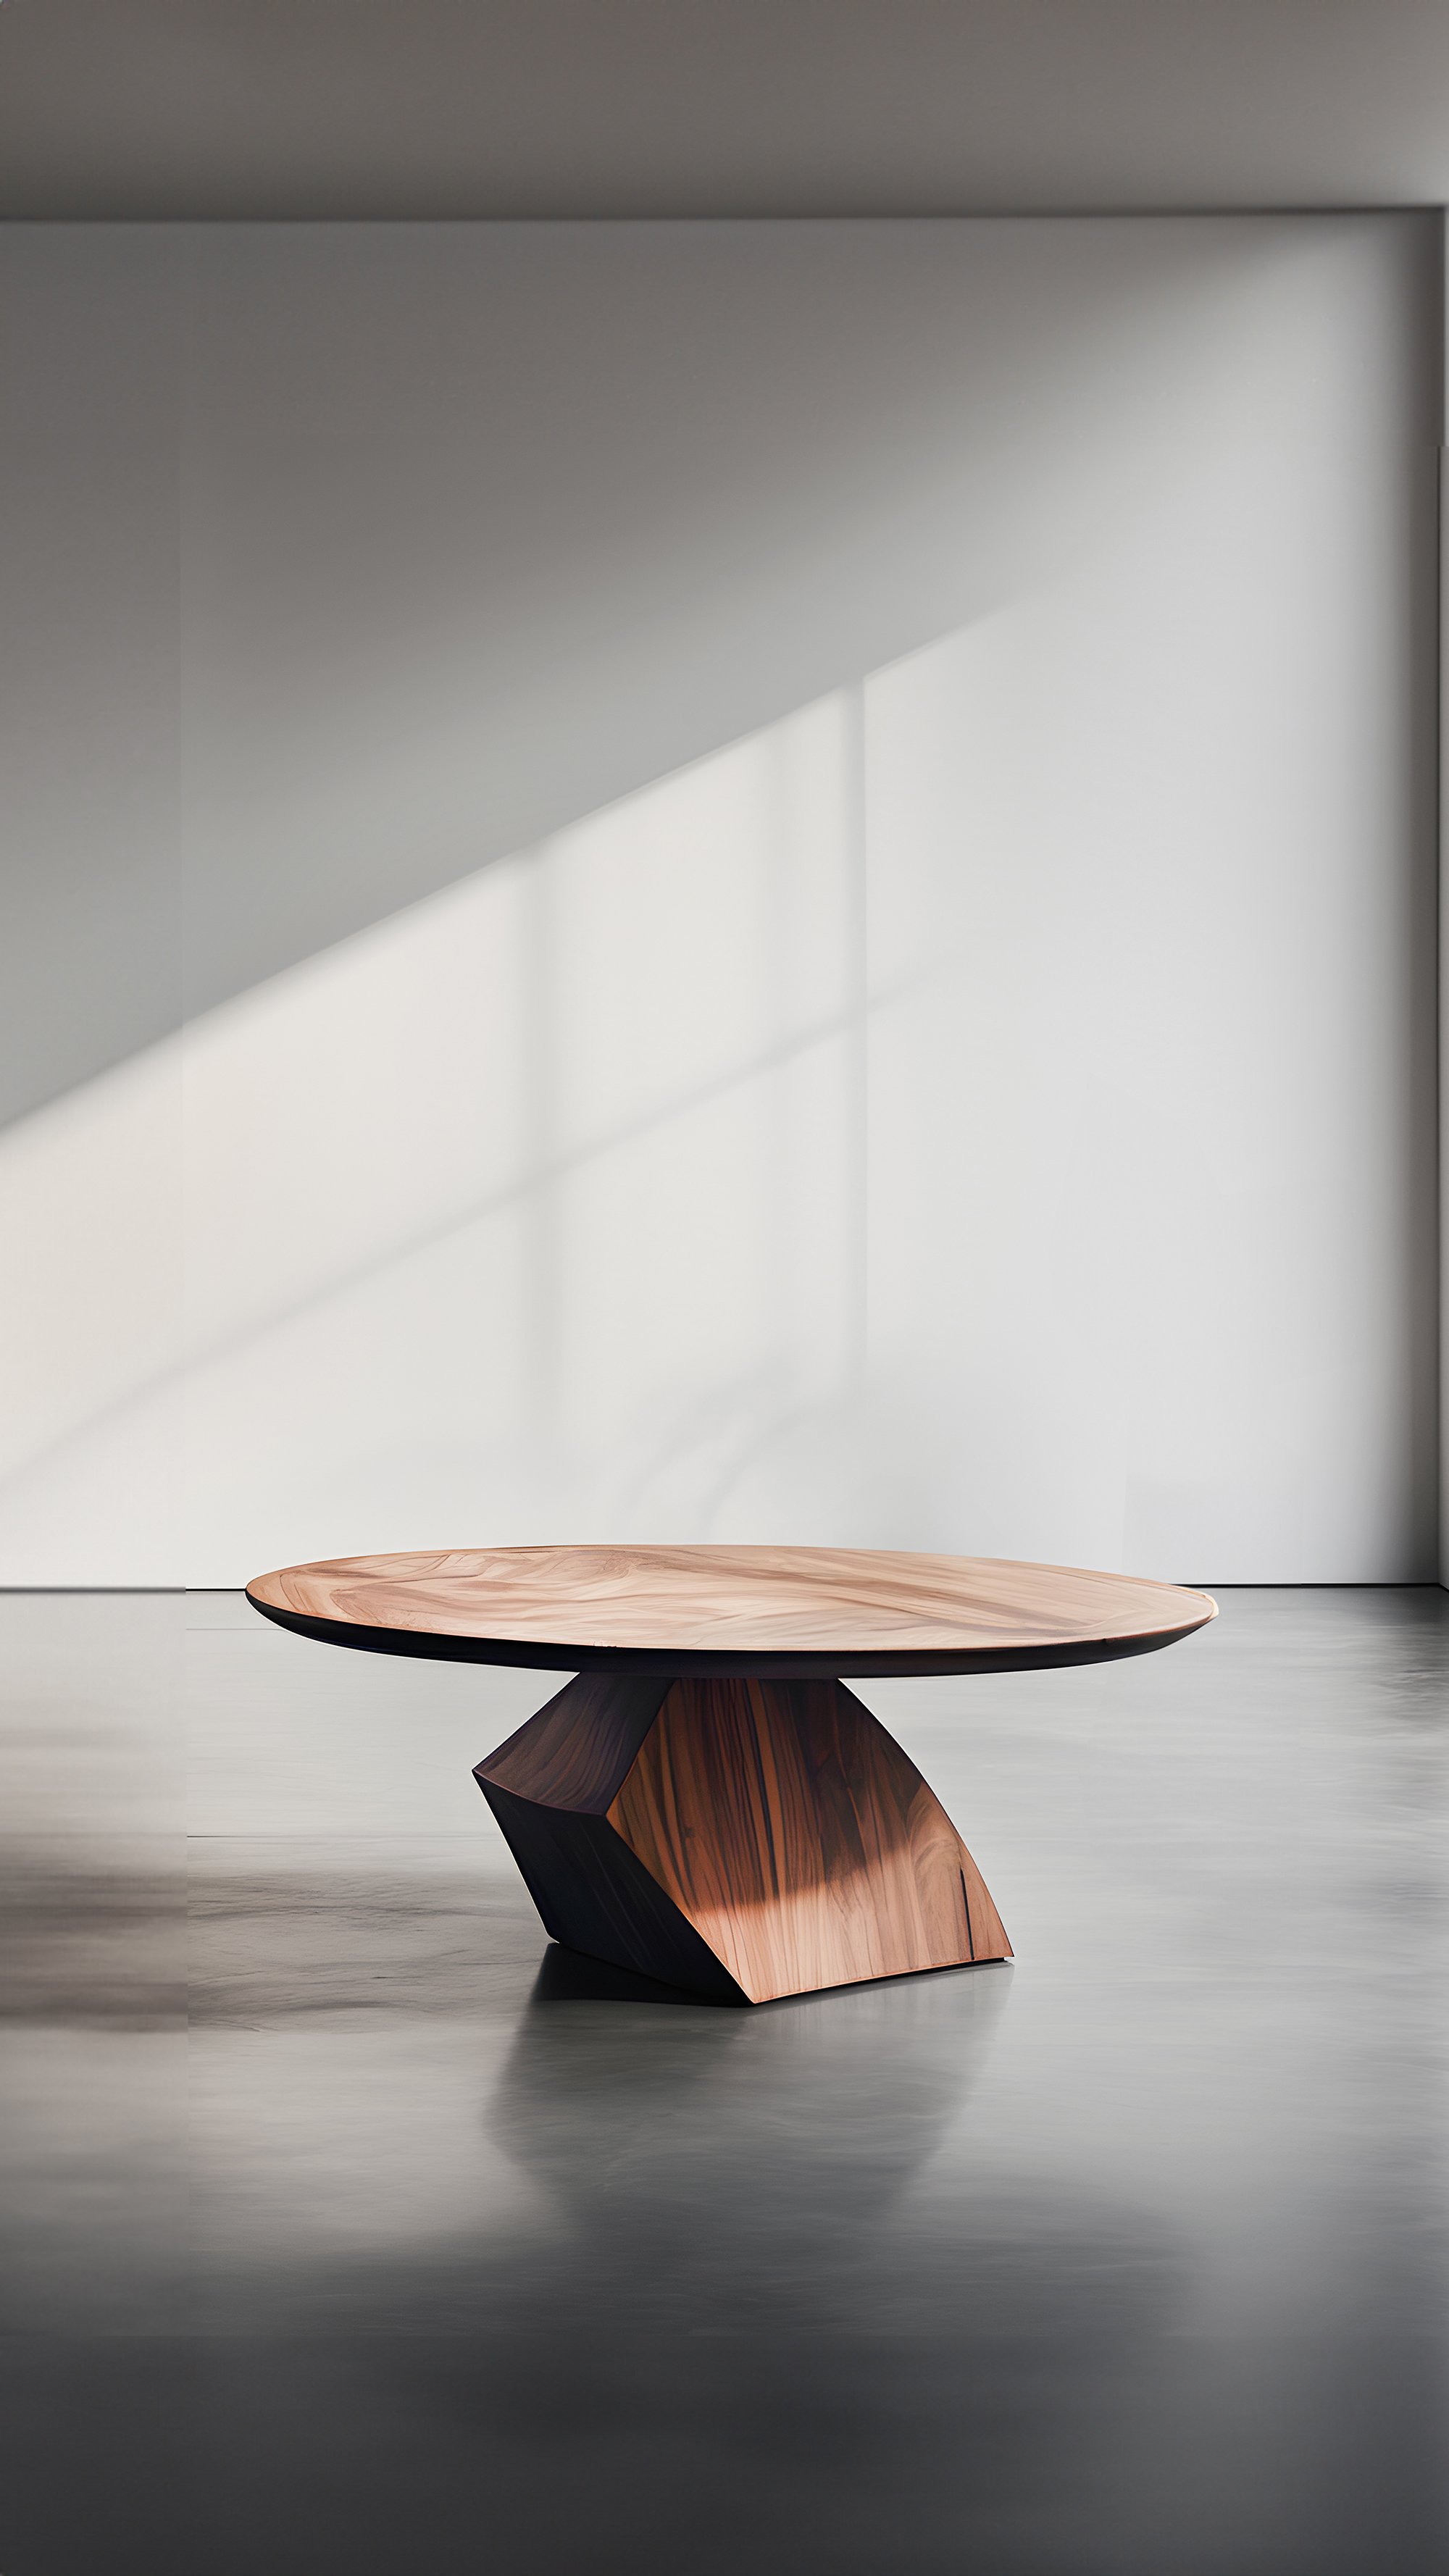 Sculptural Coffee Table Made of Solid Wood, Center Table Solace S36 by Joel Escalona — 6.jpg